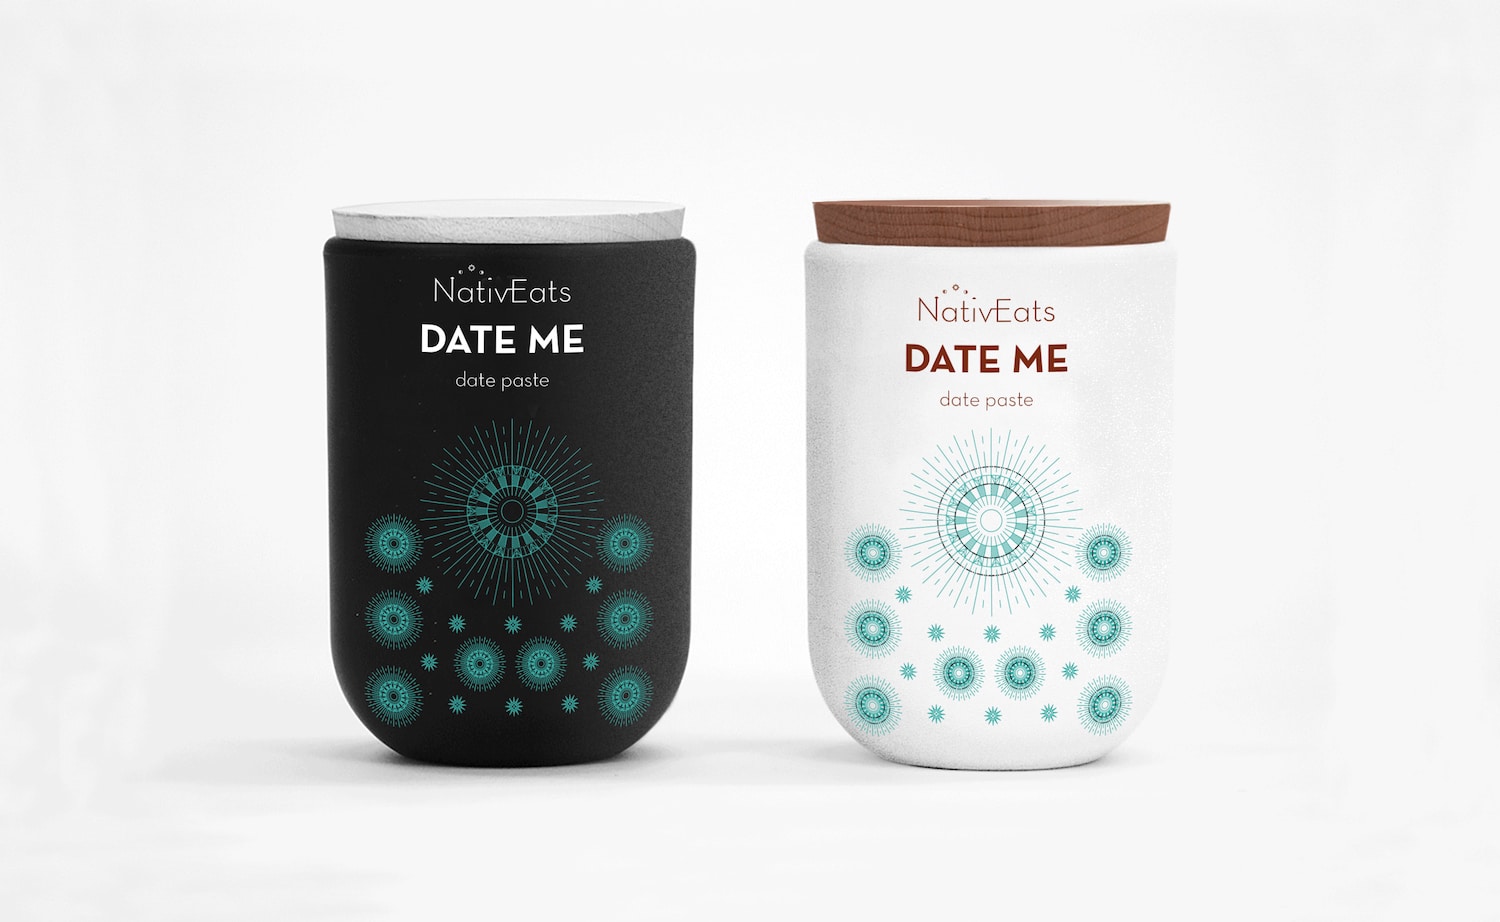 Dates paste packaging with graphic design in a clay jar